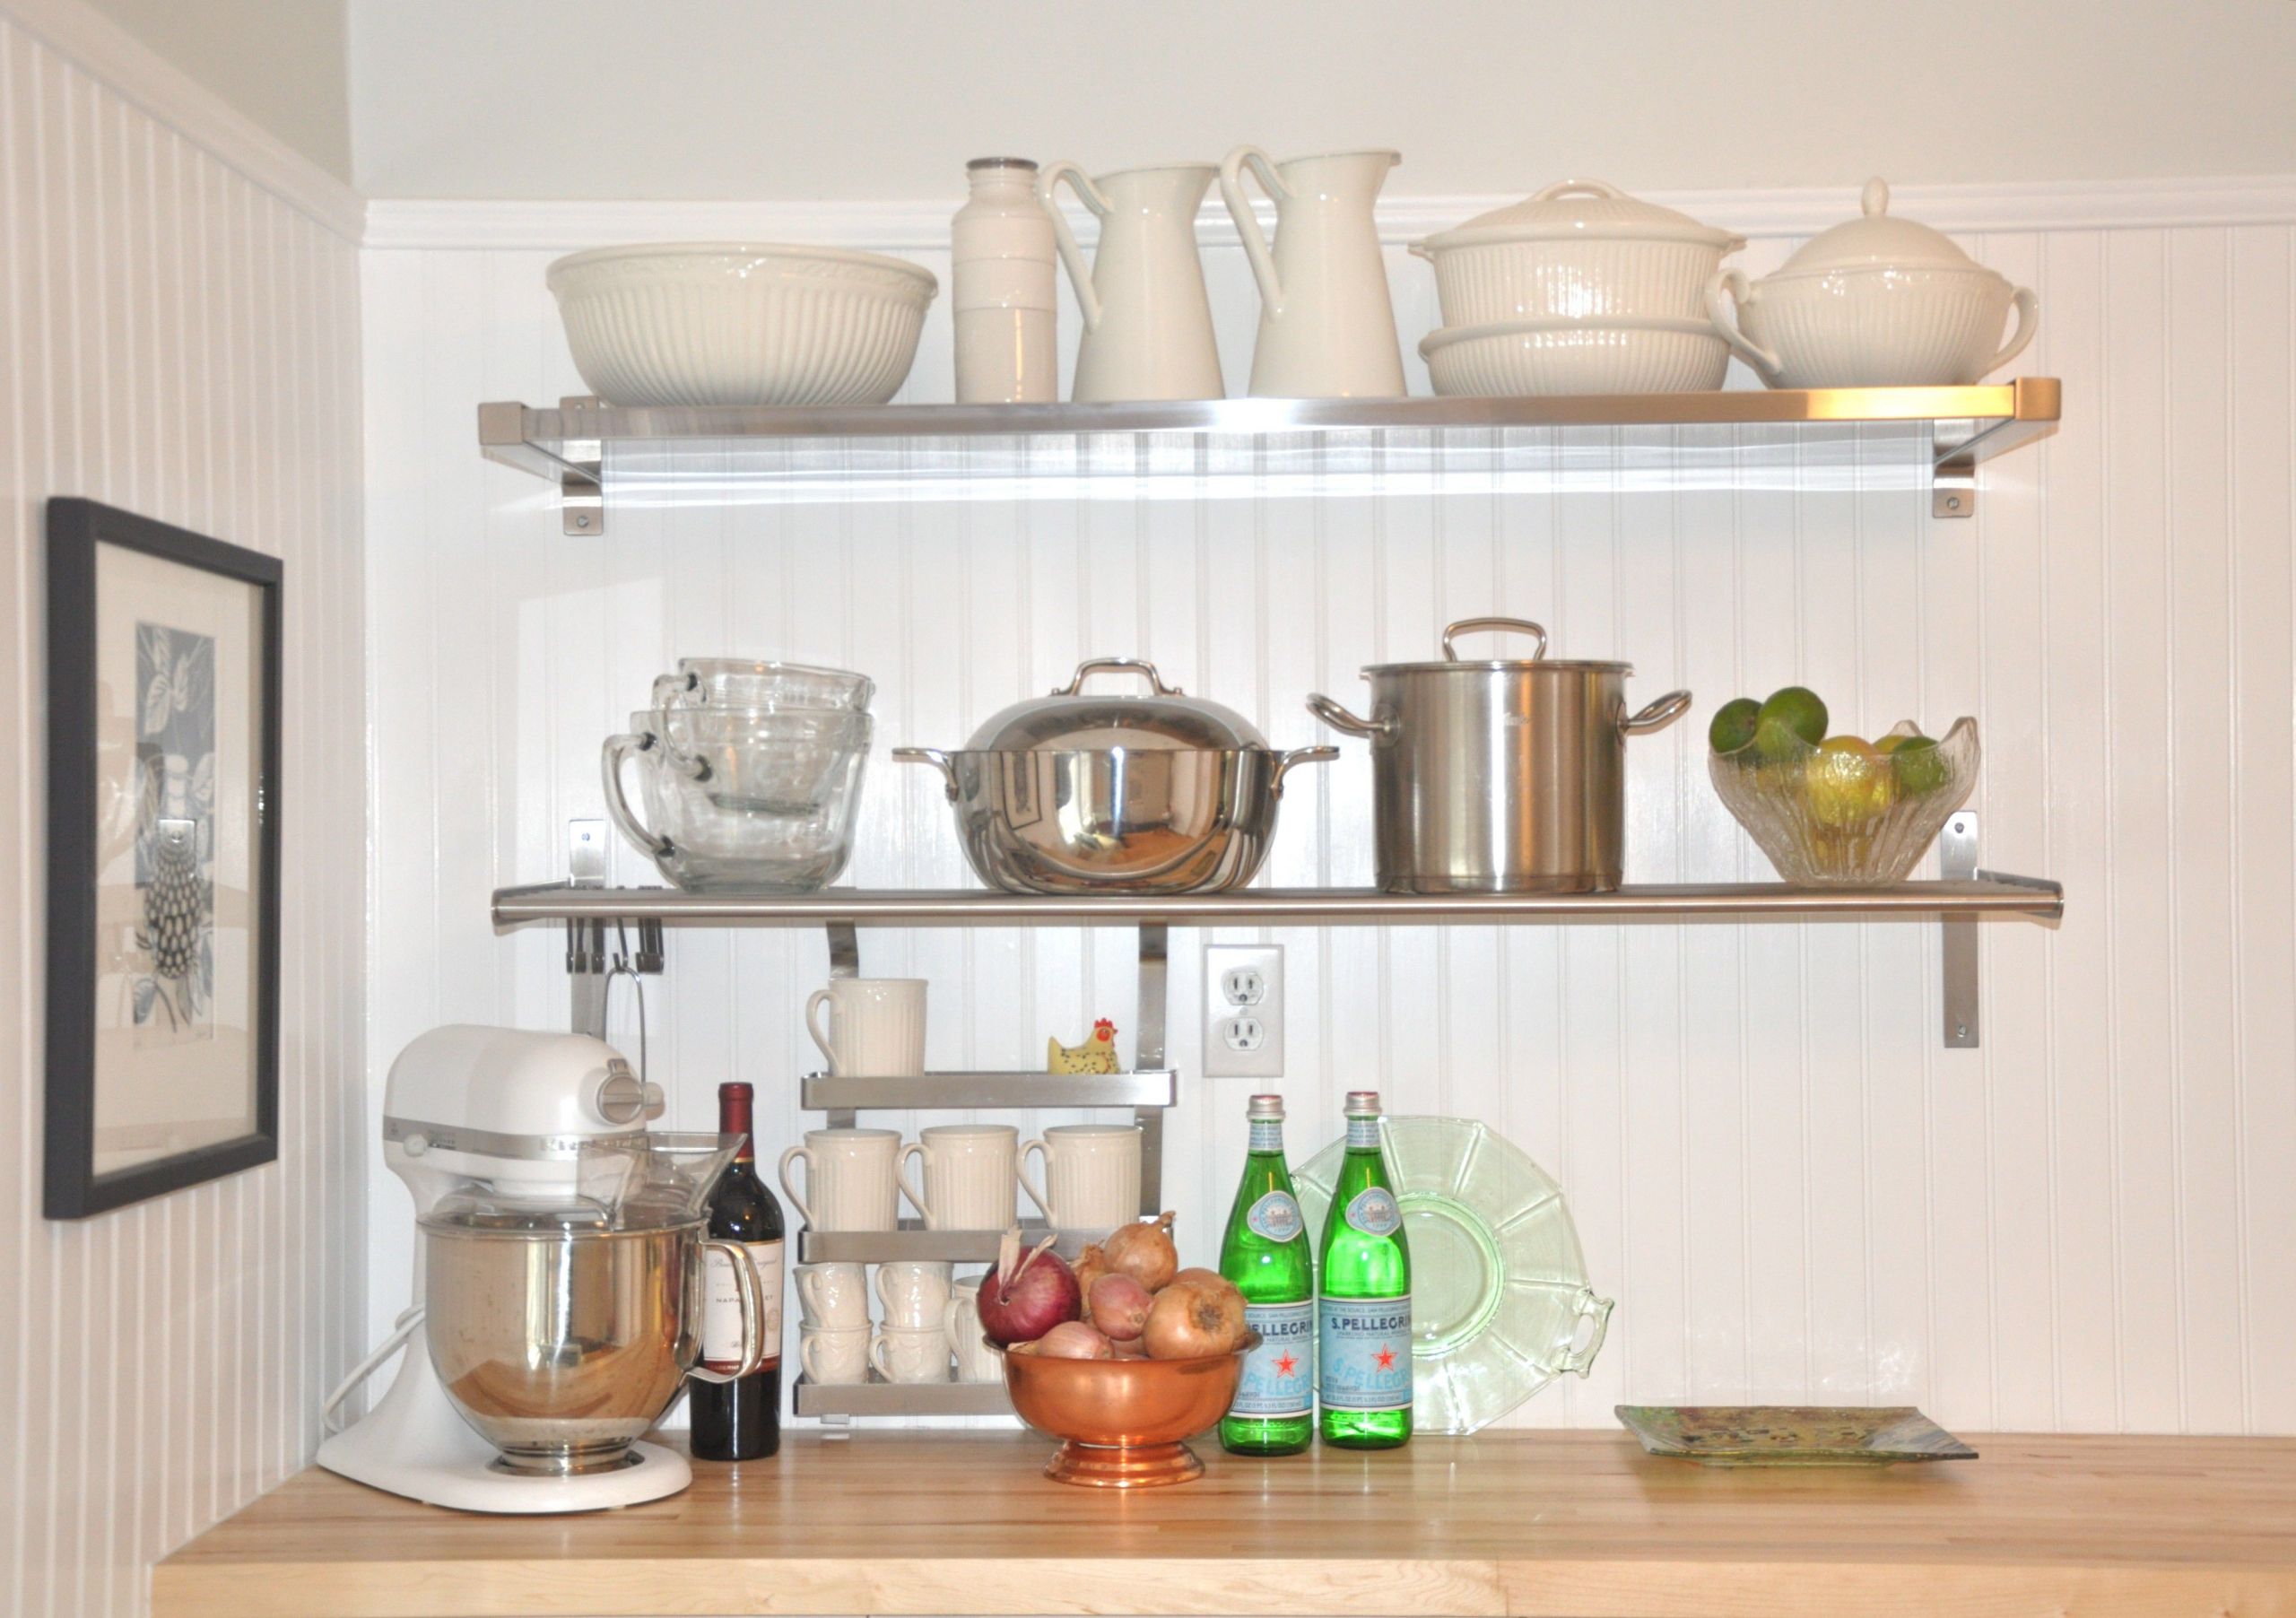 Ikea Kitchen Wall Shelves
 White Wall Shelves for Effective Storage in Small Kitchen